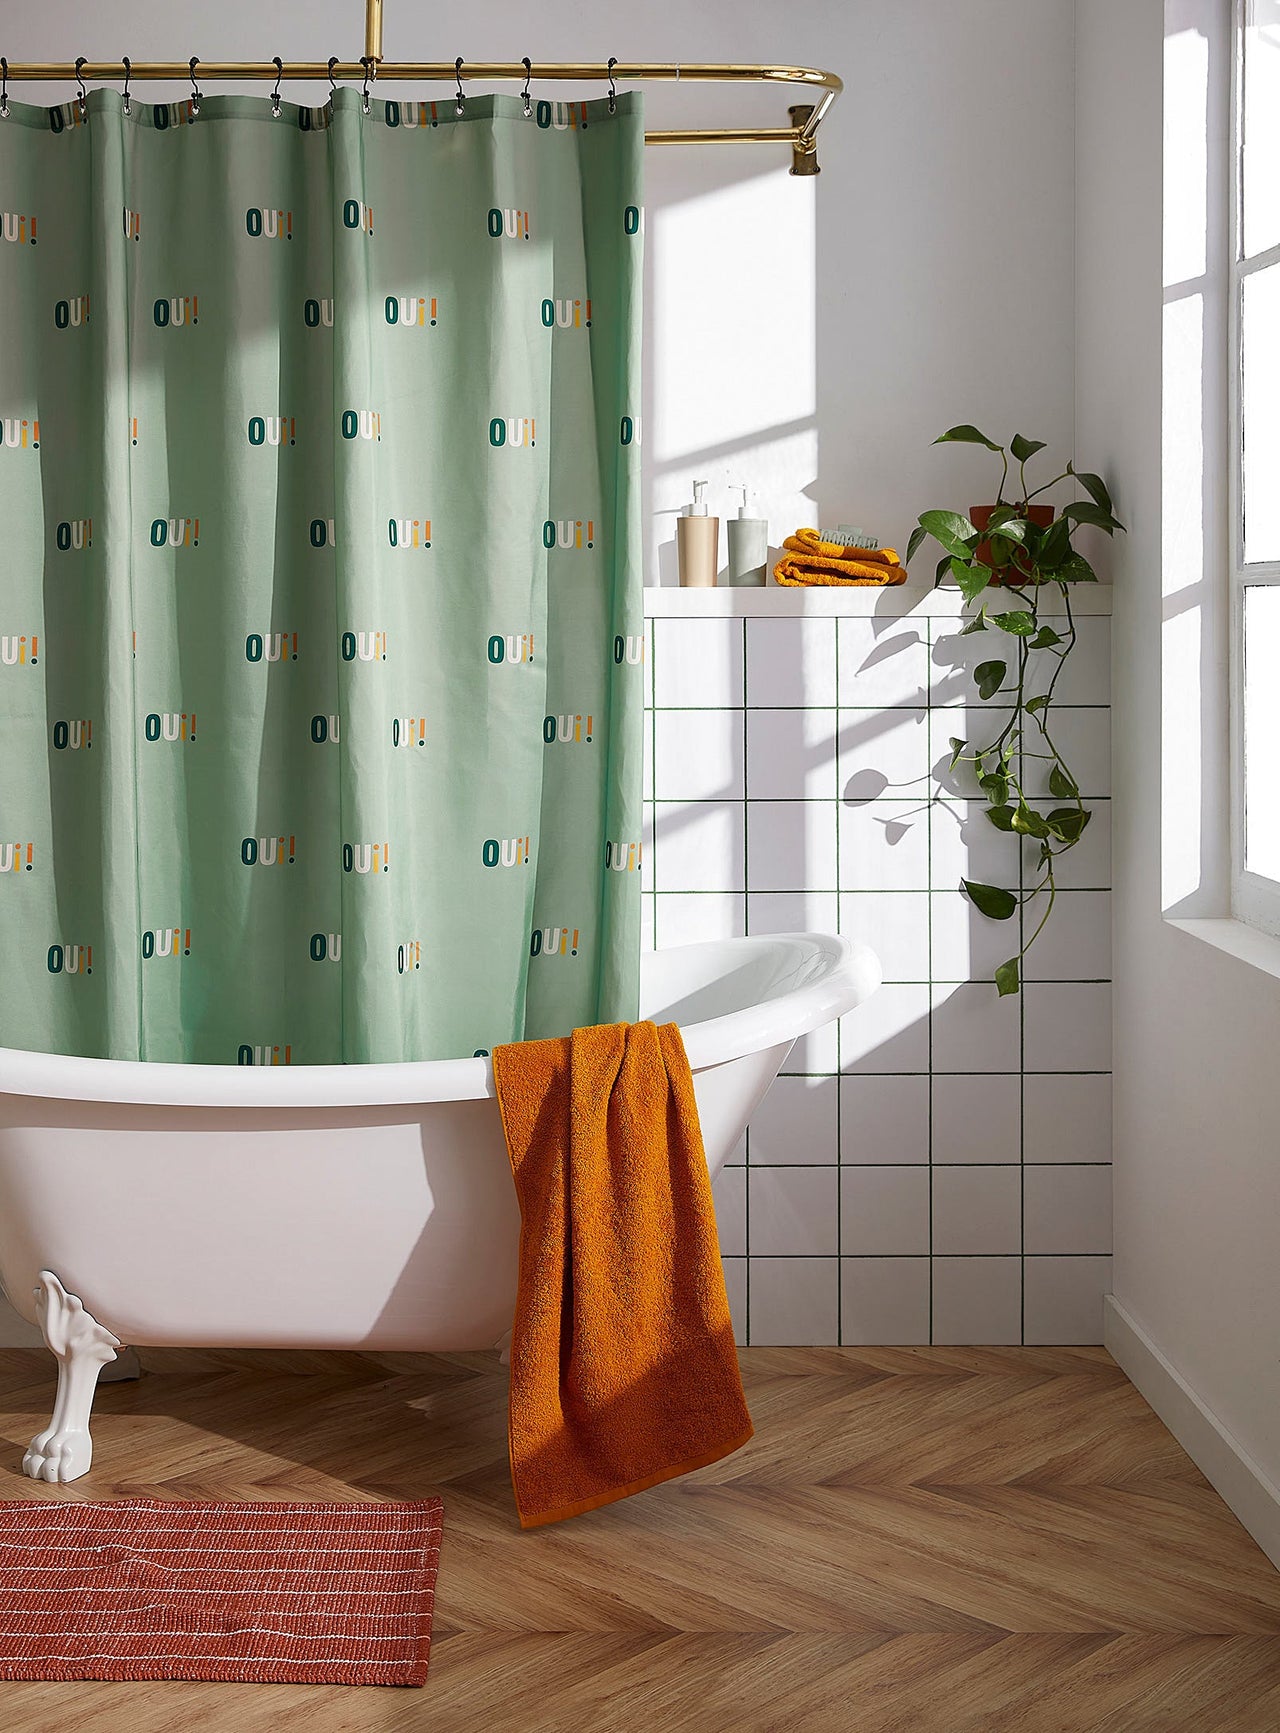 Oh que oui shower curtain